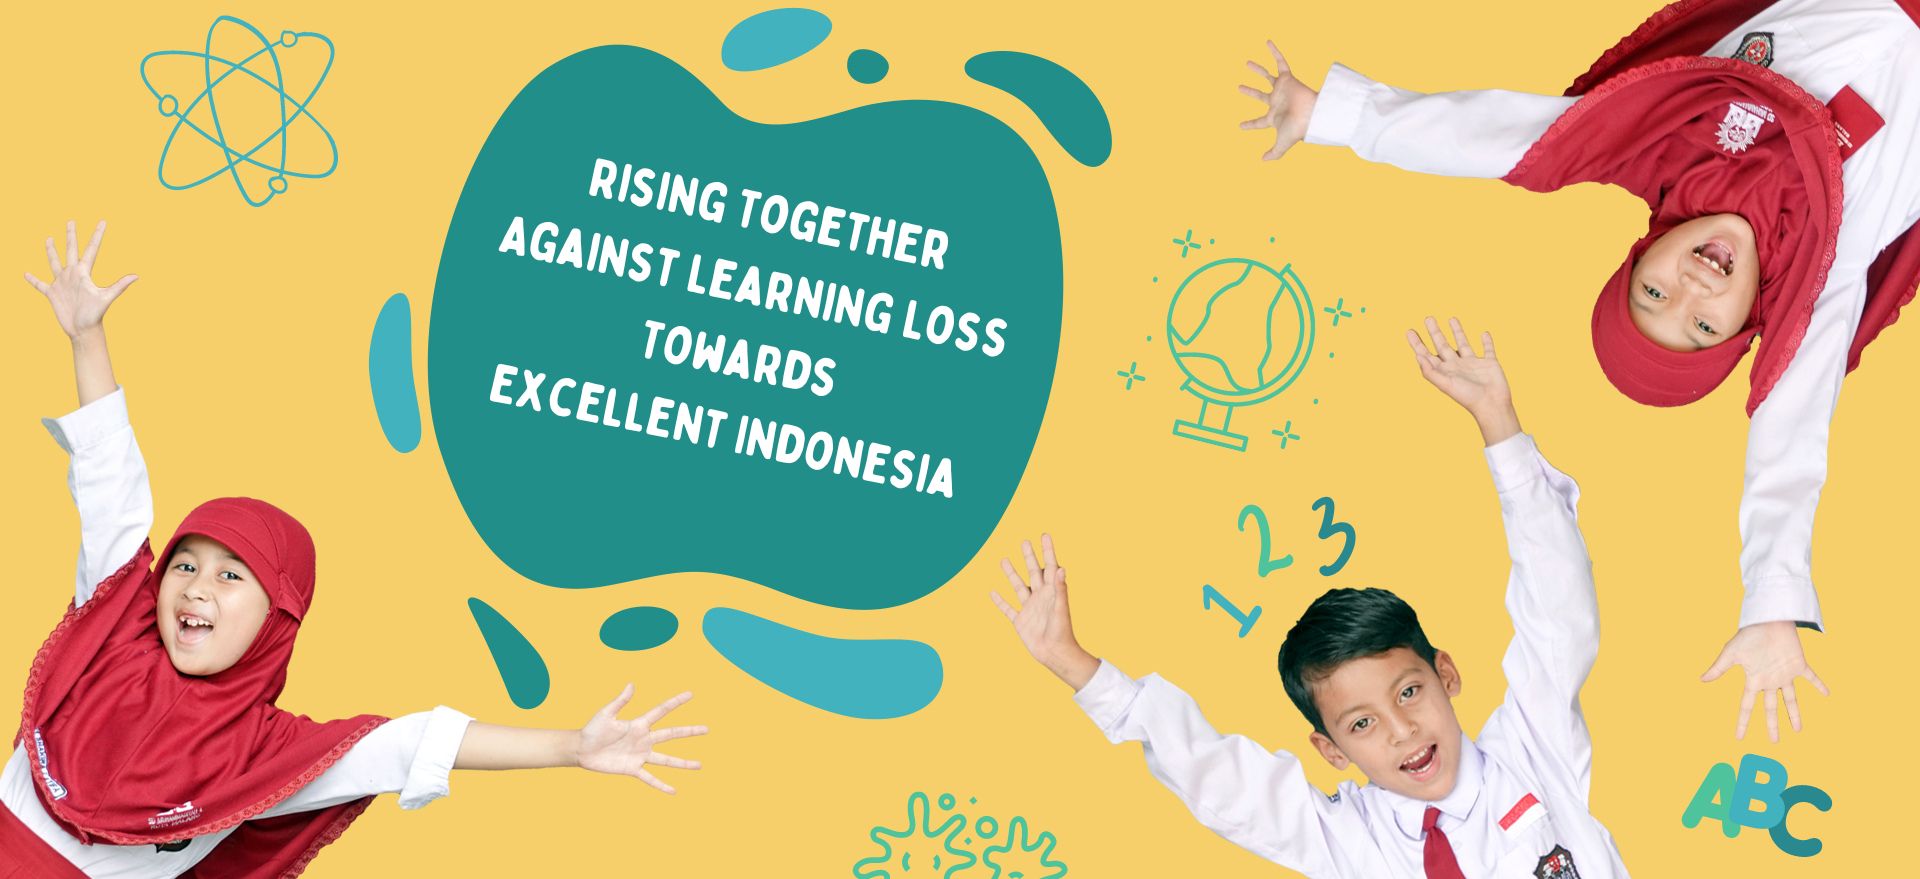 Rising Together Against Learning Loss Towards Excellent Indonesia